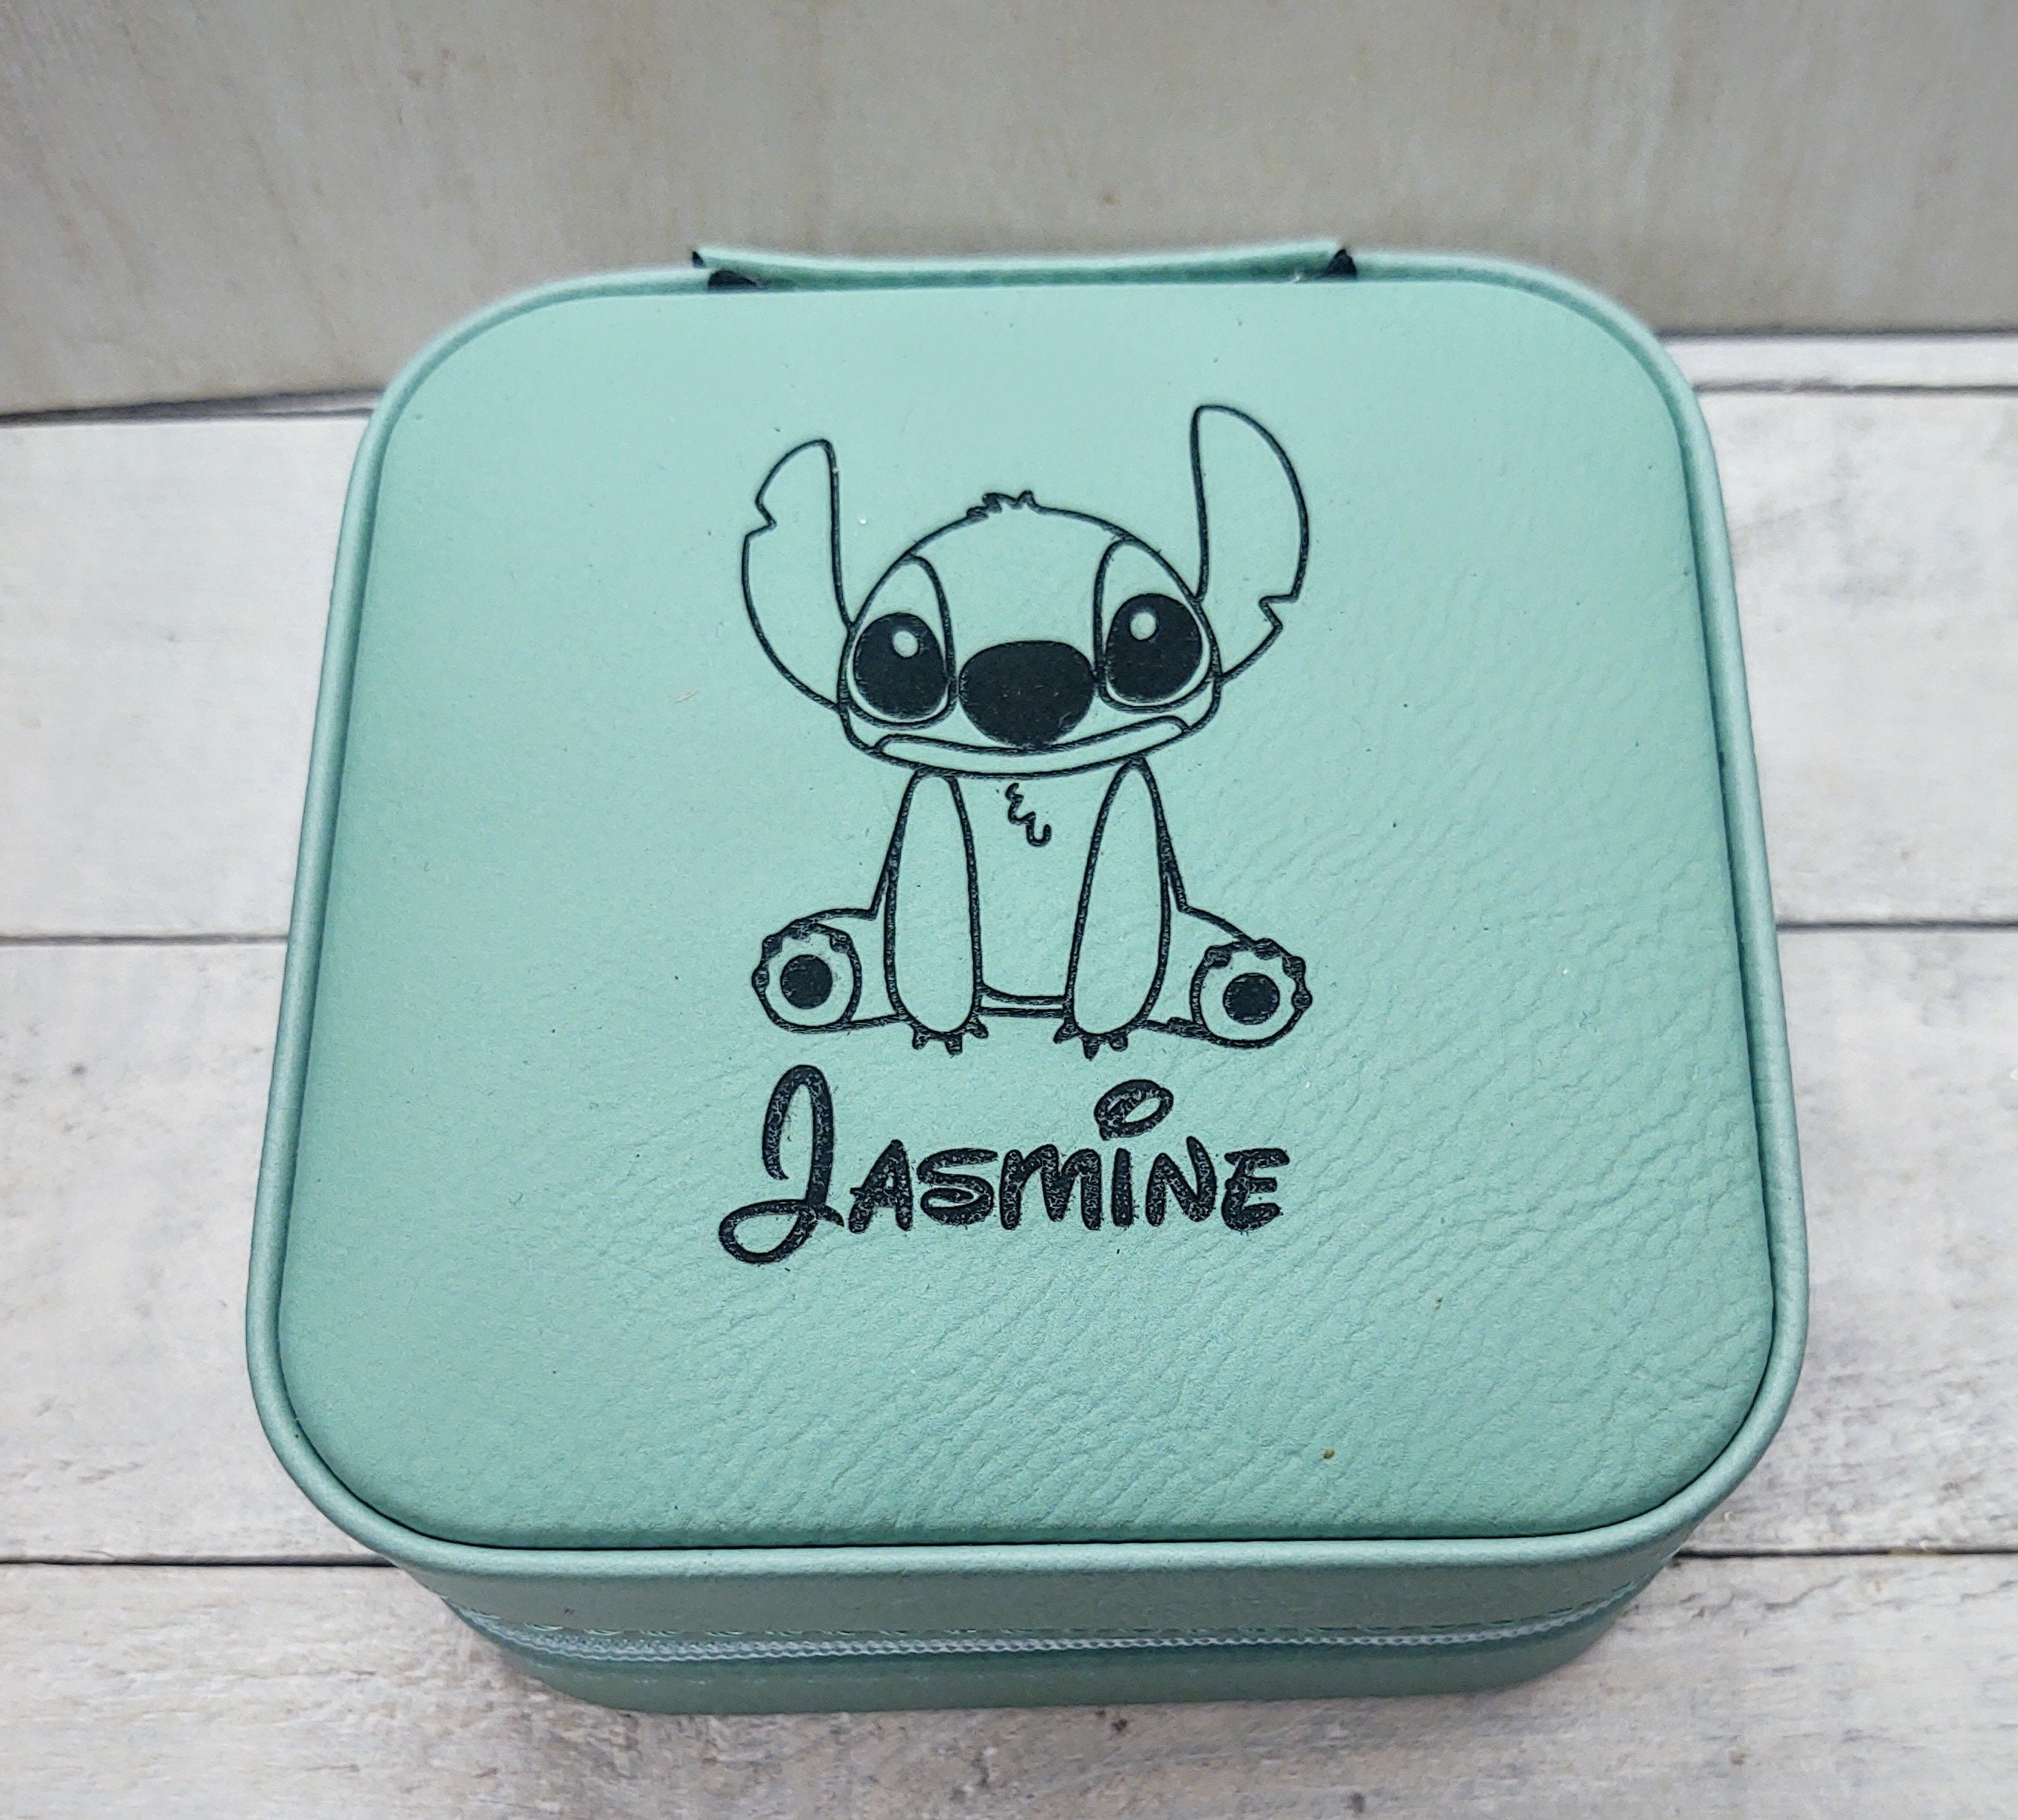 Disney Musical Jewellery Box for Girls, Stitch Gifts for Girls